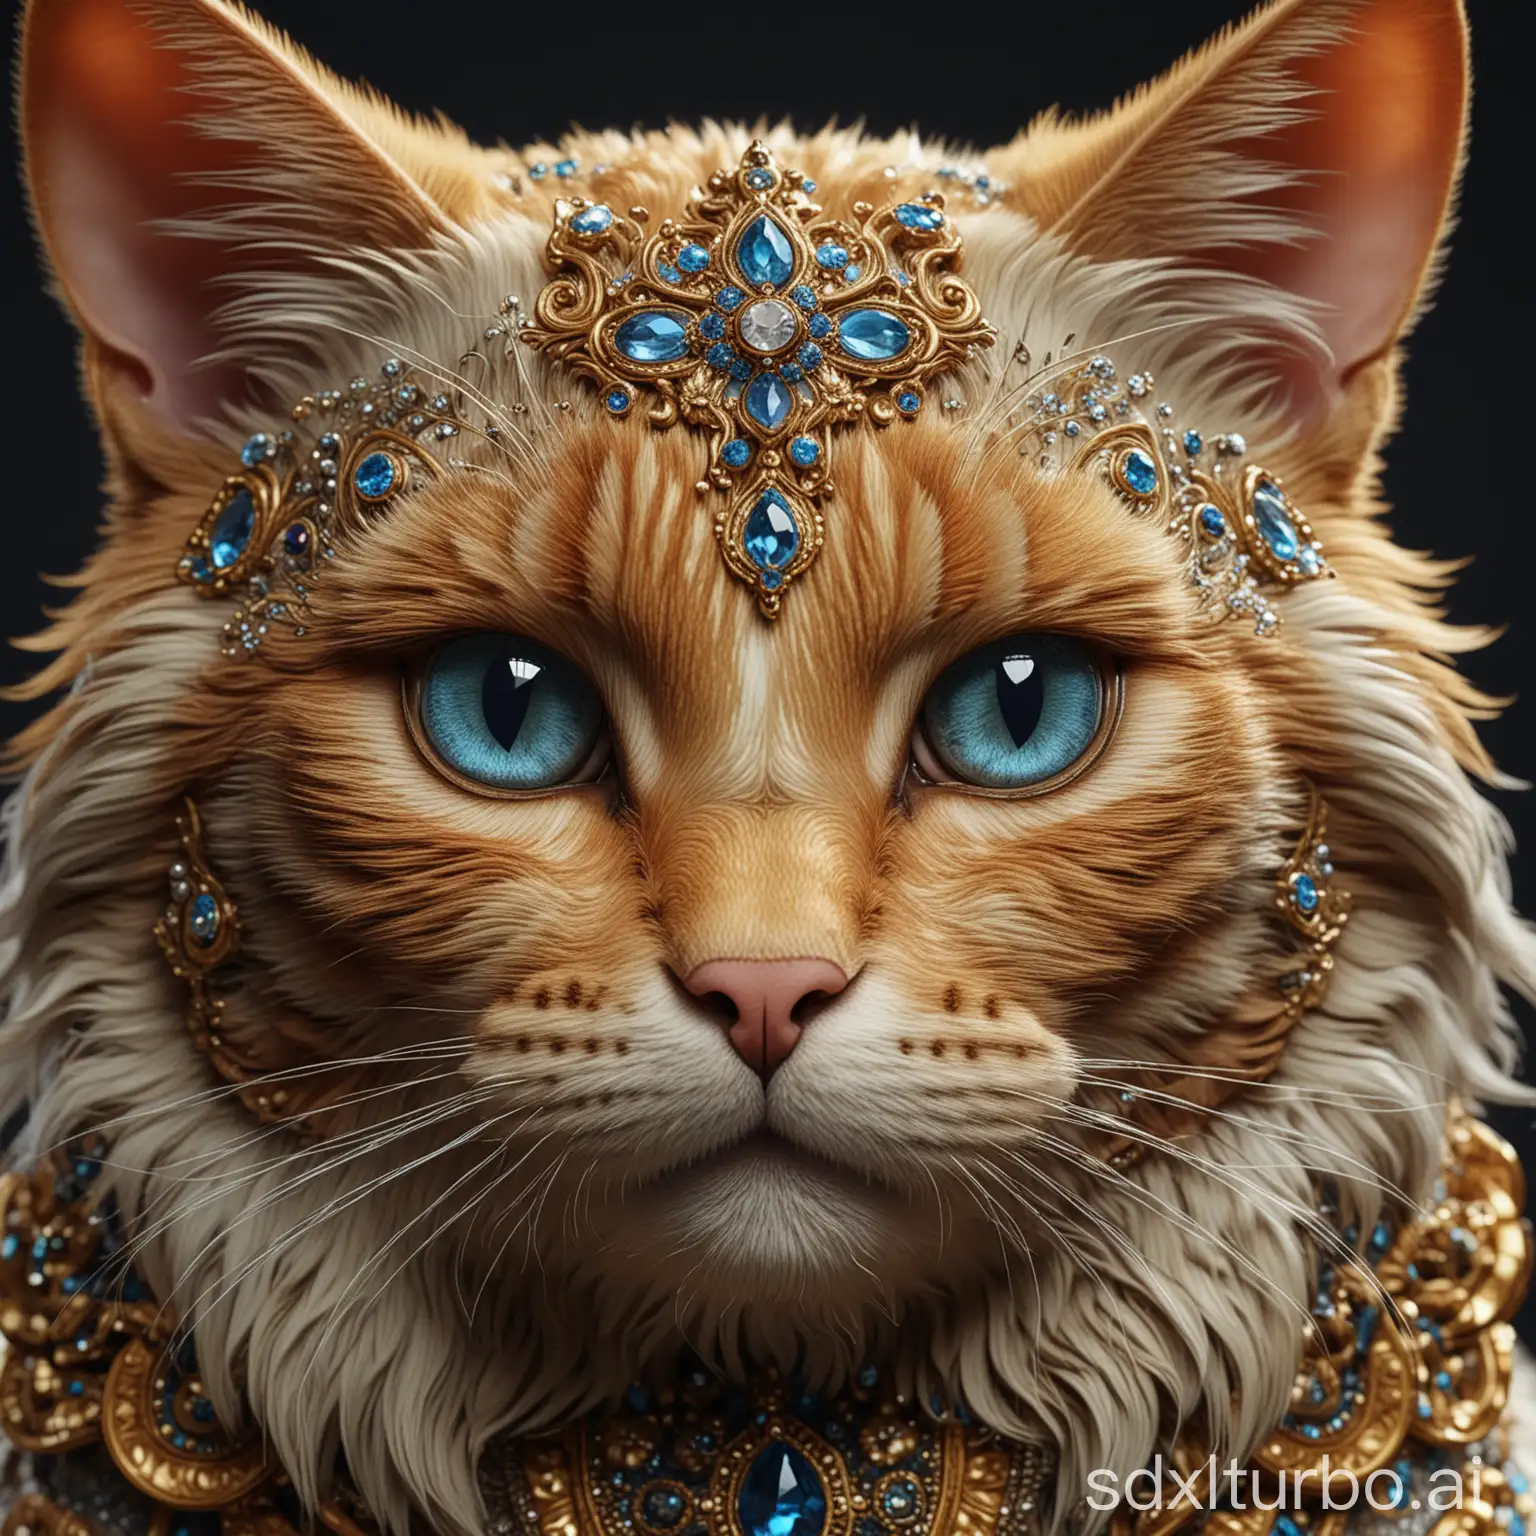 """
"""Insanely detailed elaborate and intricate beautiful cat: ultra high quality : 16k resolution, ornate """
"""